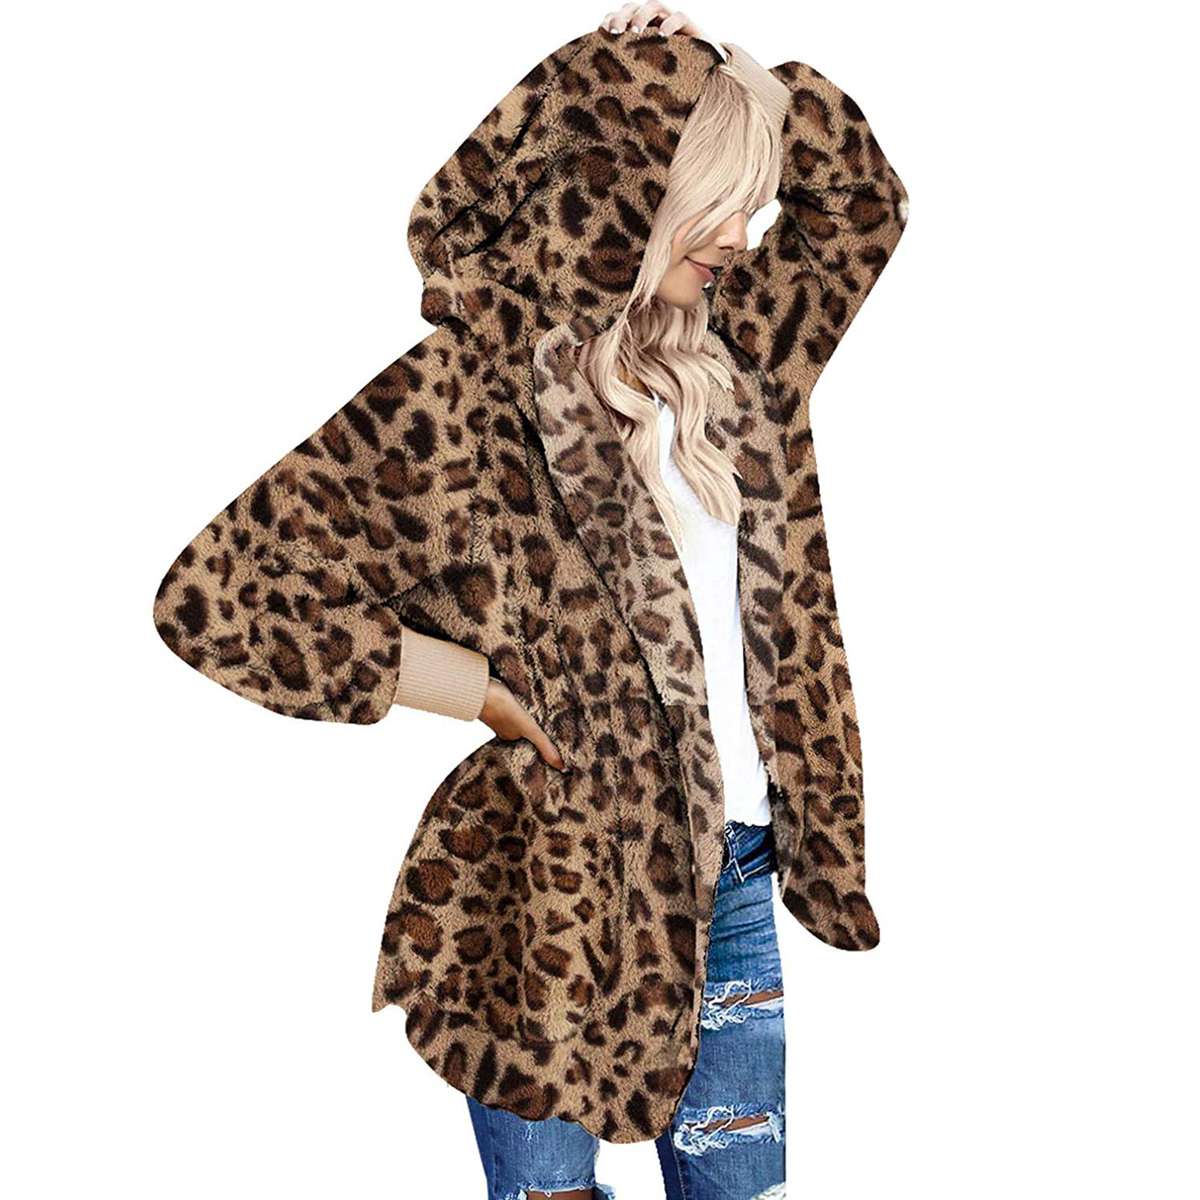 Dokotoo Womens Long Sleeve Solid Fuzzy Fleece Open Front Hooded Cardigans Jacket